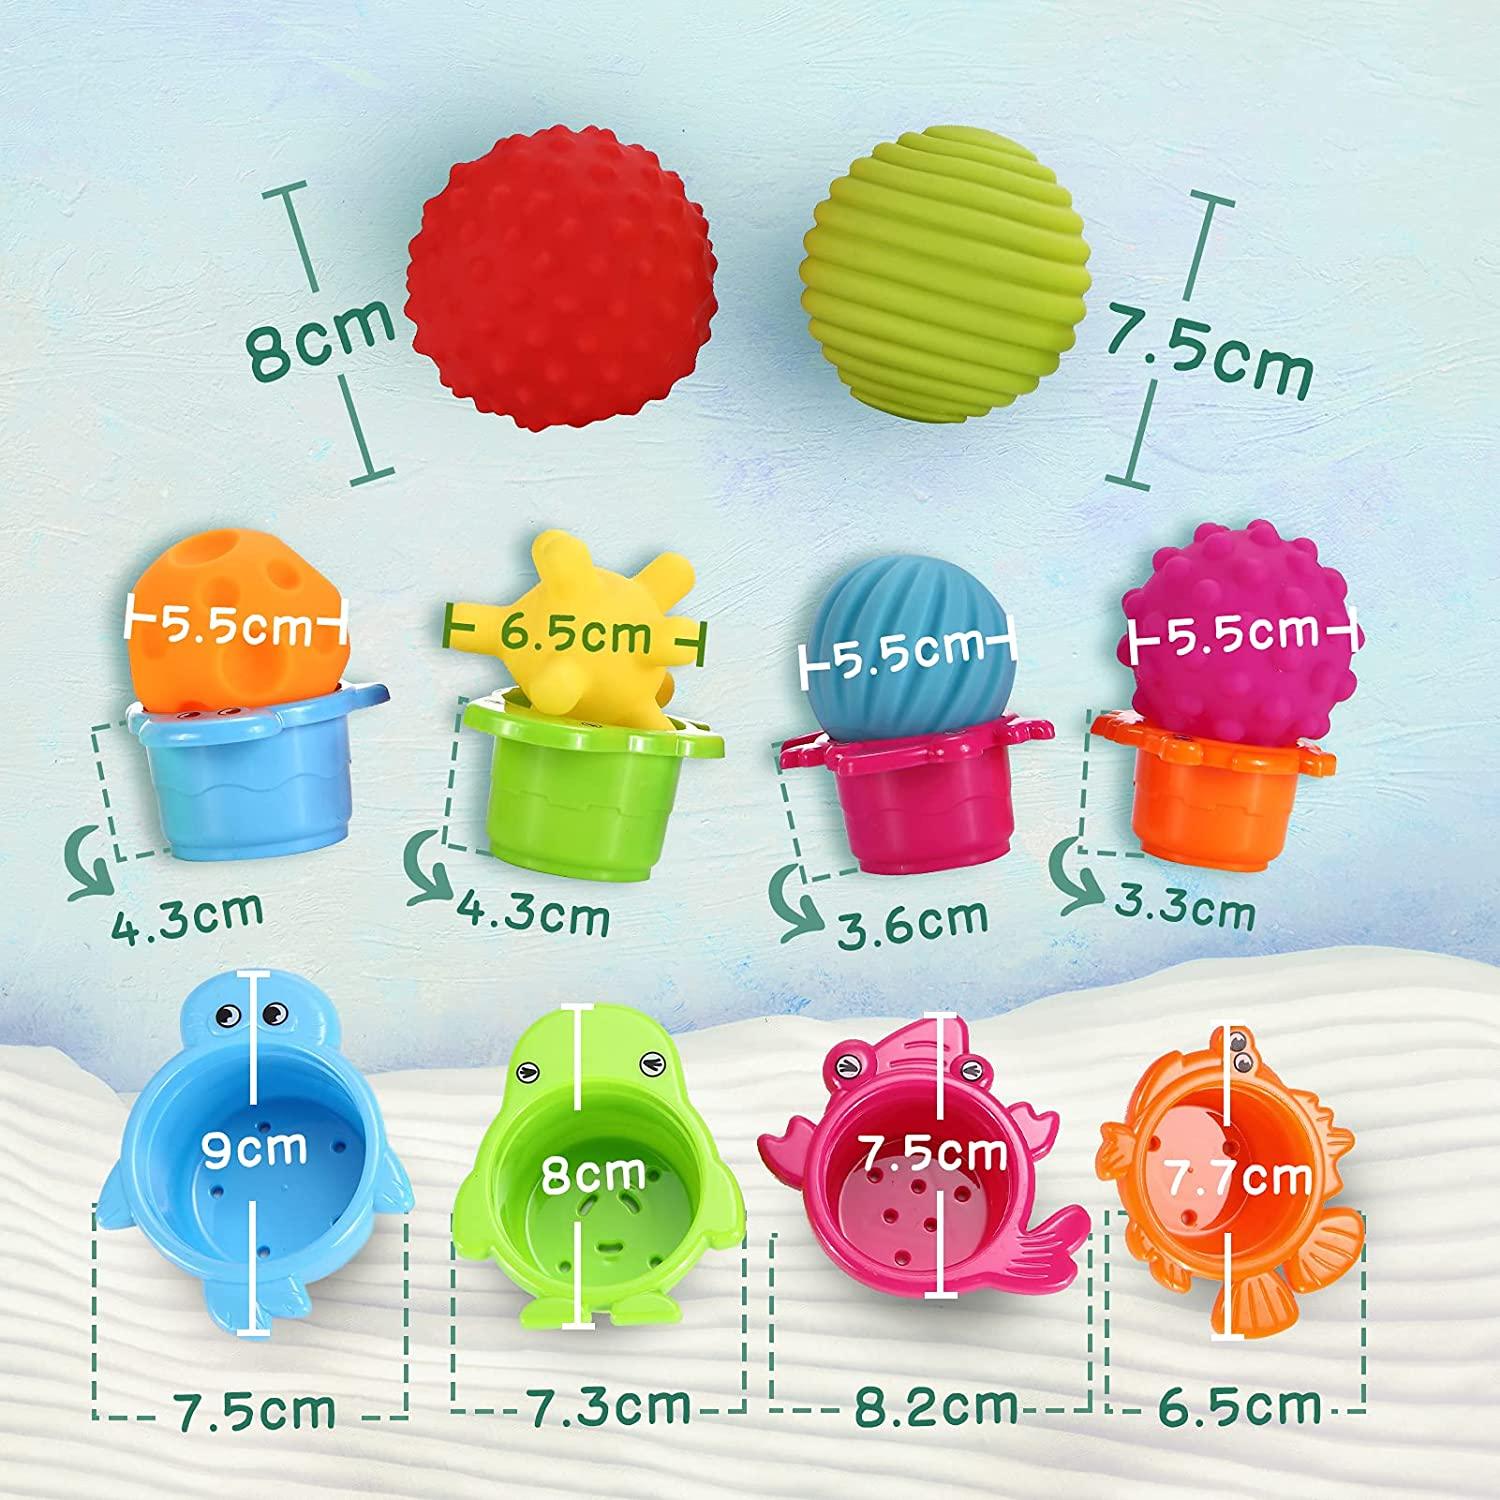 6Pc Sensory Balls for Kids - Textured Multi Ball Set for Babies & Toddlers, Squeezy Tactile Sensory Toys with Stacking Cup, Stress Relief Toy for Kids, Easter Basket Stuffers Party Favors Gifts